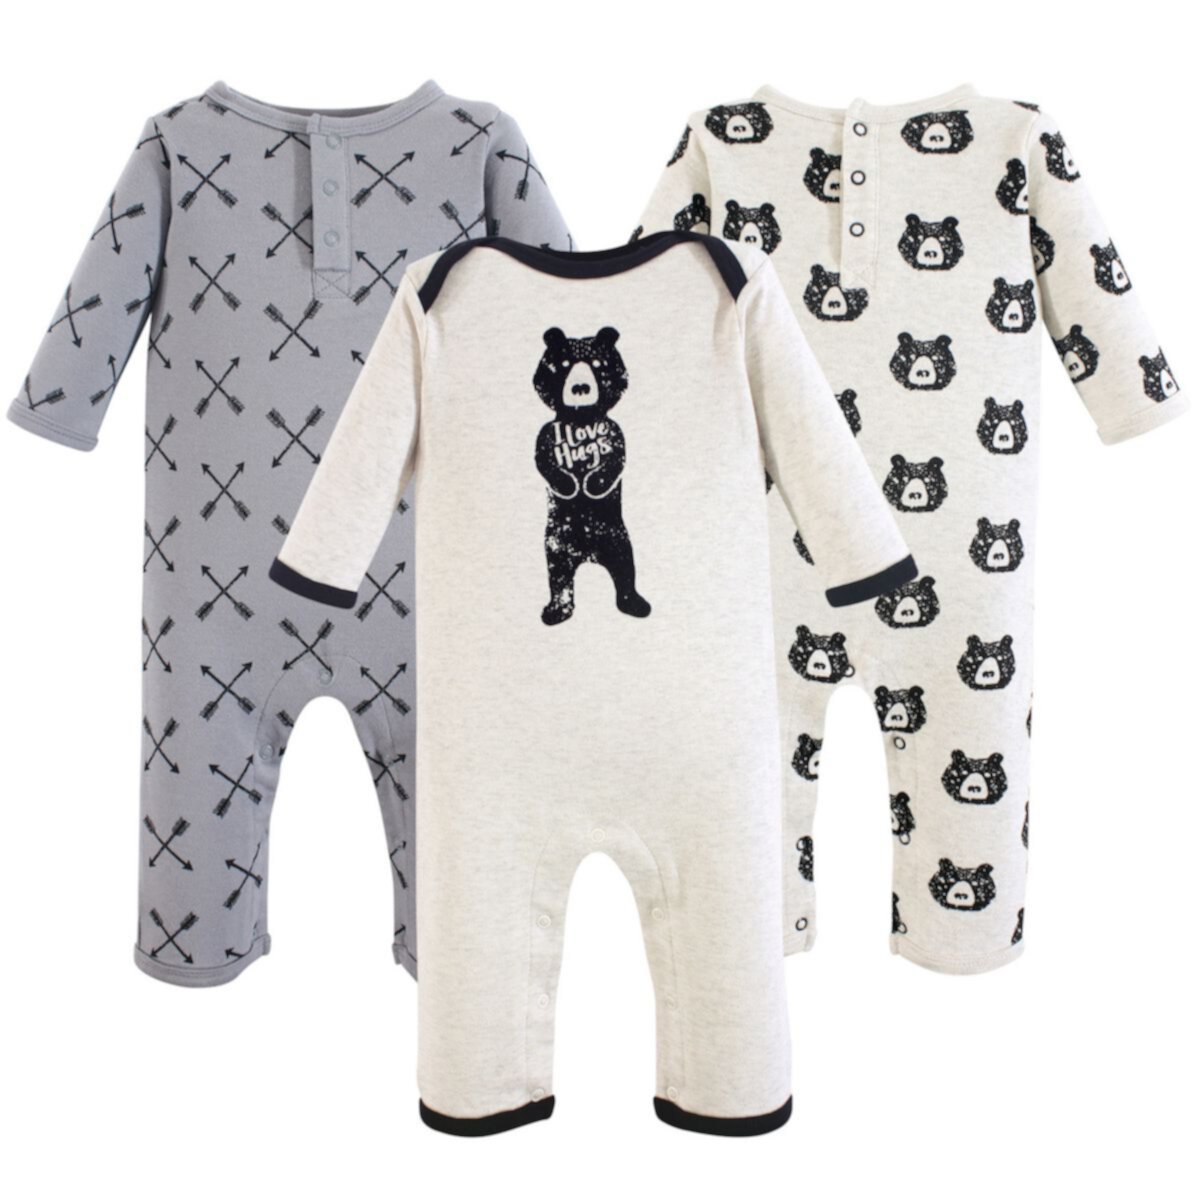 Yoga Sprout Baby Boy Cotton Coveralls 3pk, Bear Hugs Yoga Sprout